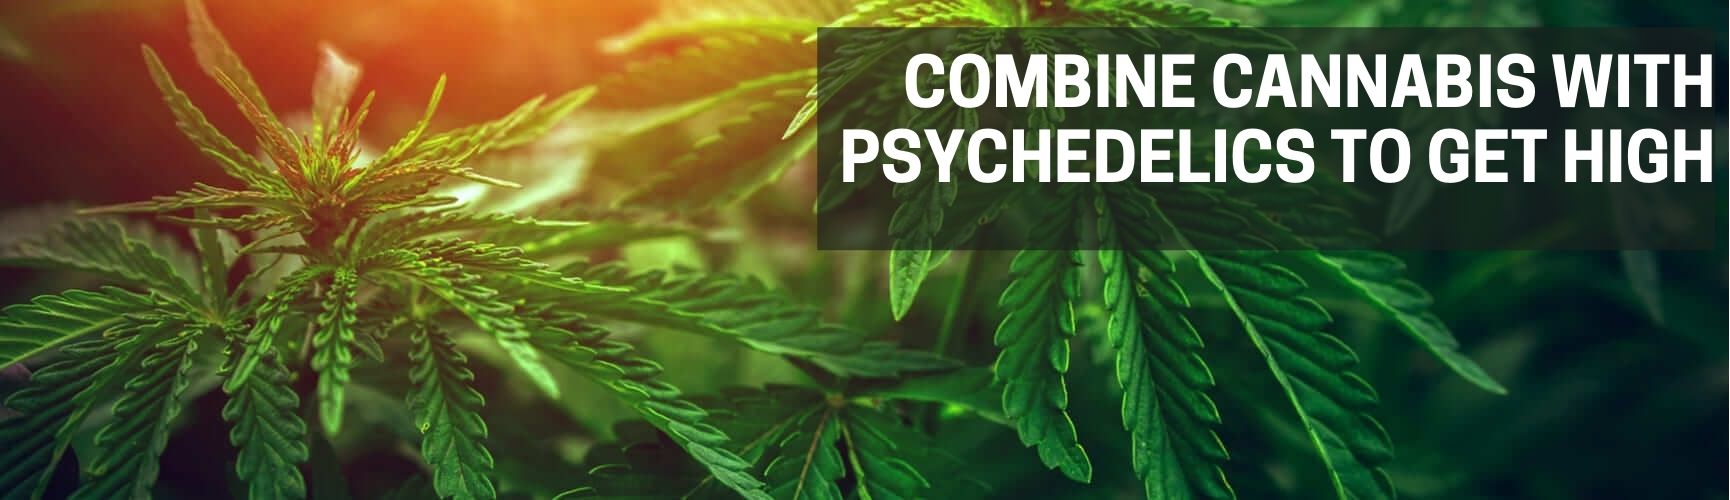 combine cannabis with psychedelics to get high